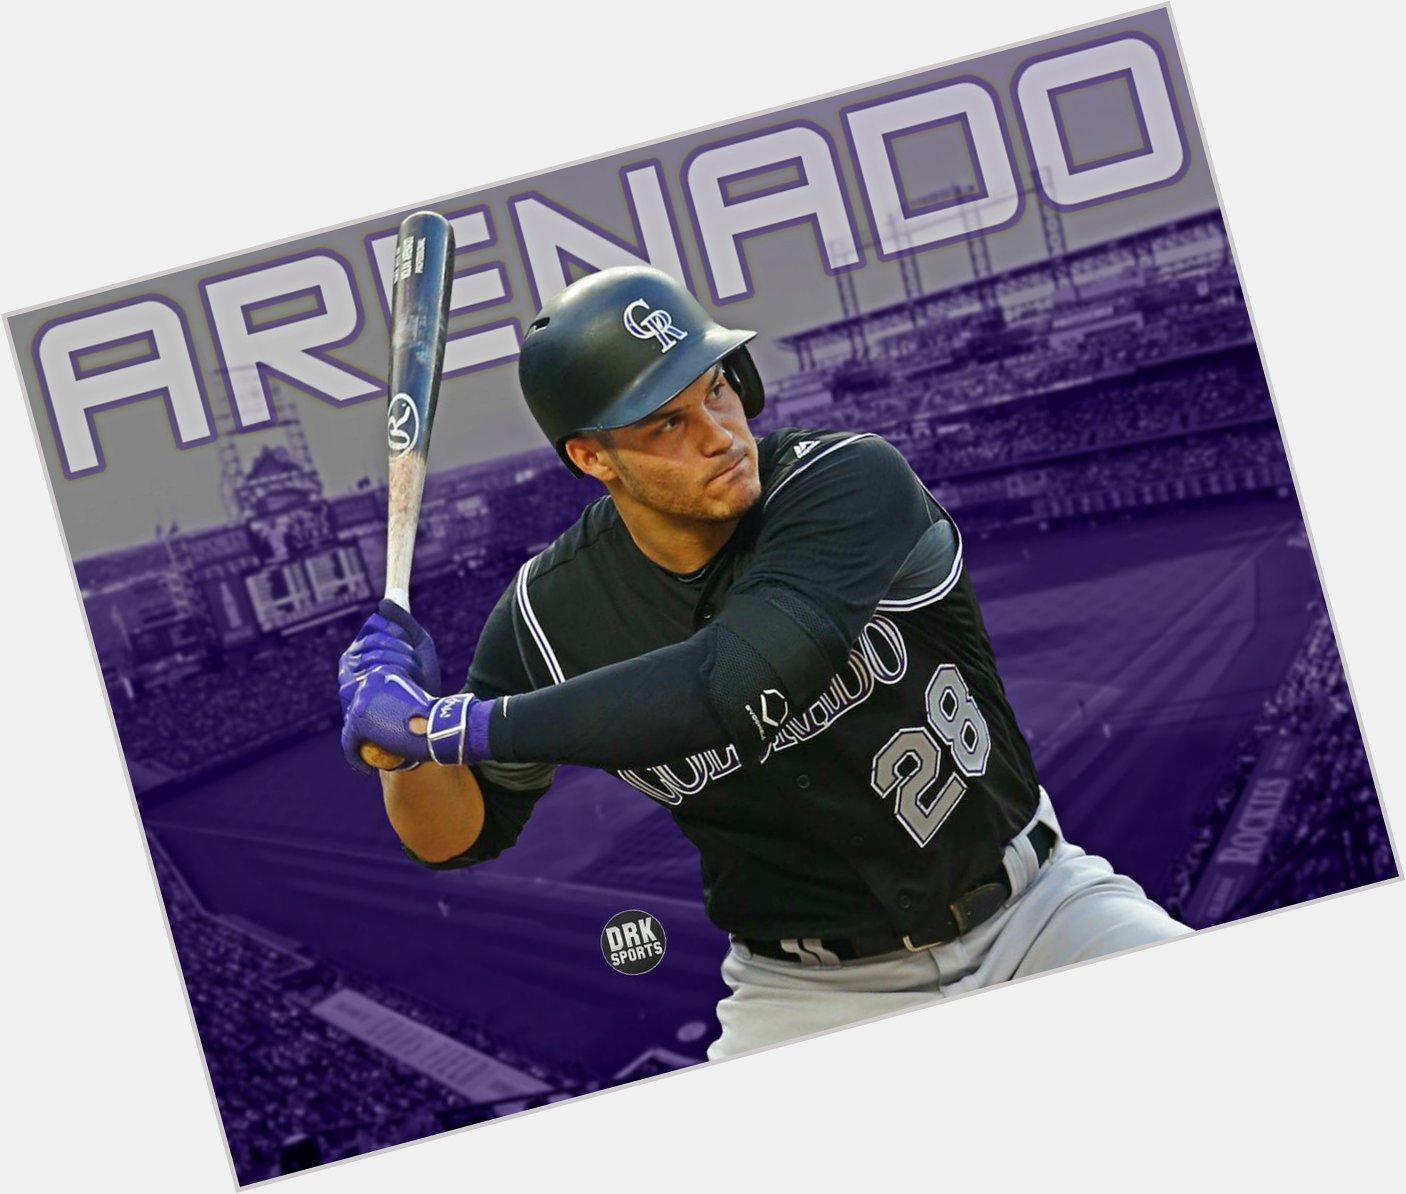 Happy 26th Birthday to one of my favorite baseball players, 2x All-Star and 4x Gold Glover Nolan Arenado! 